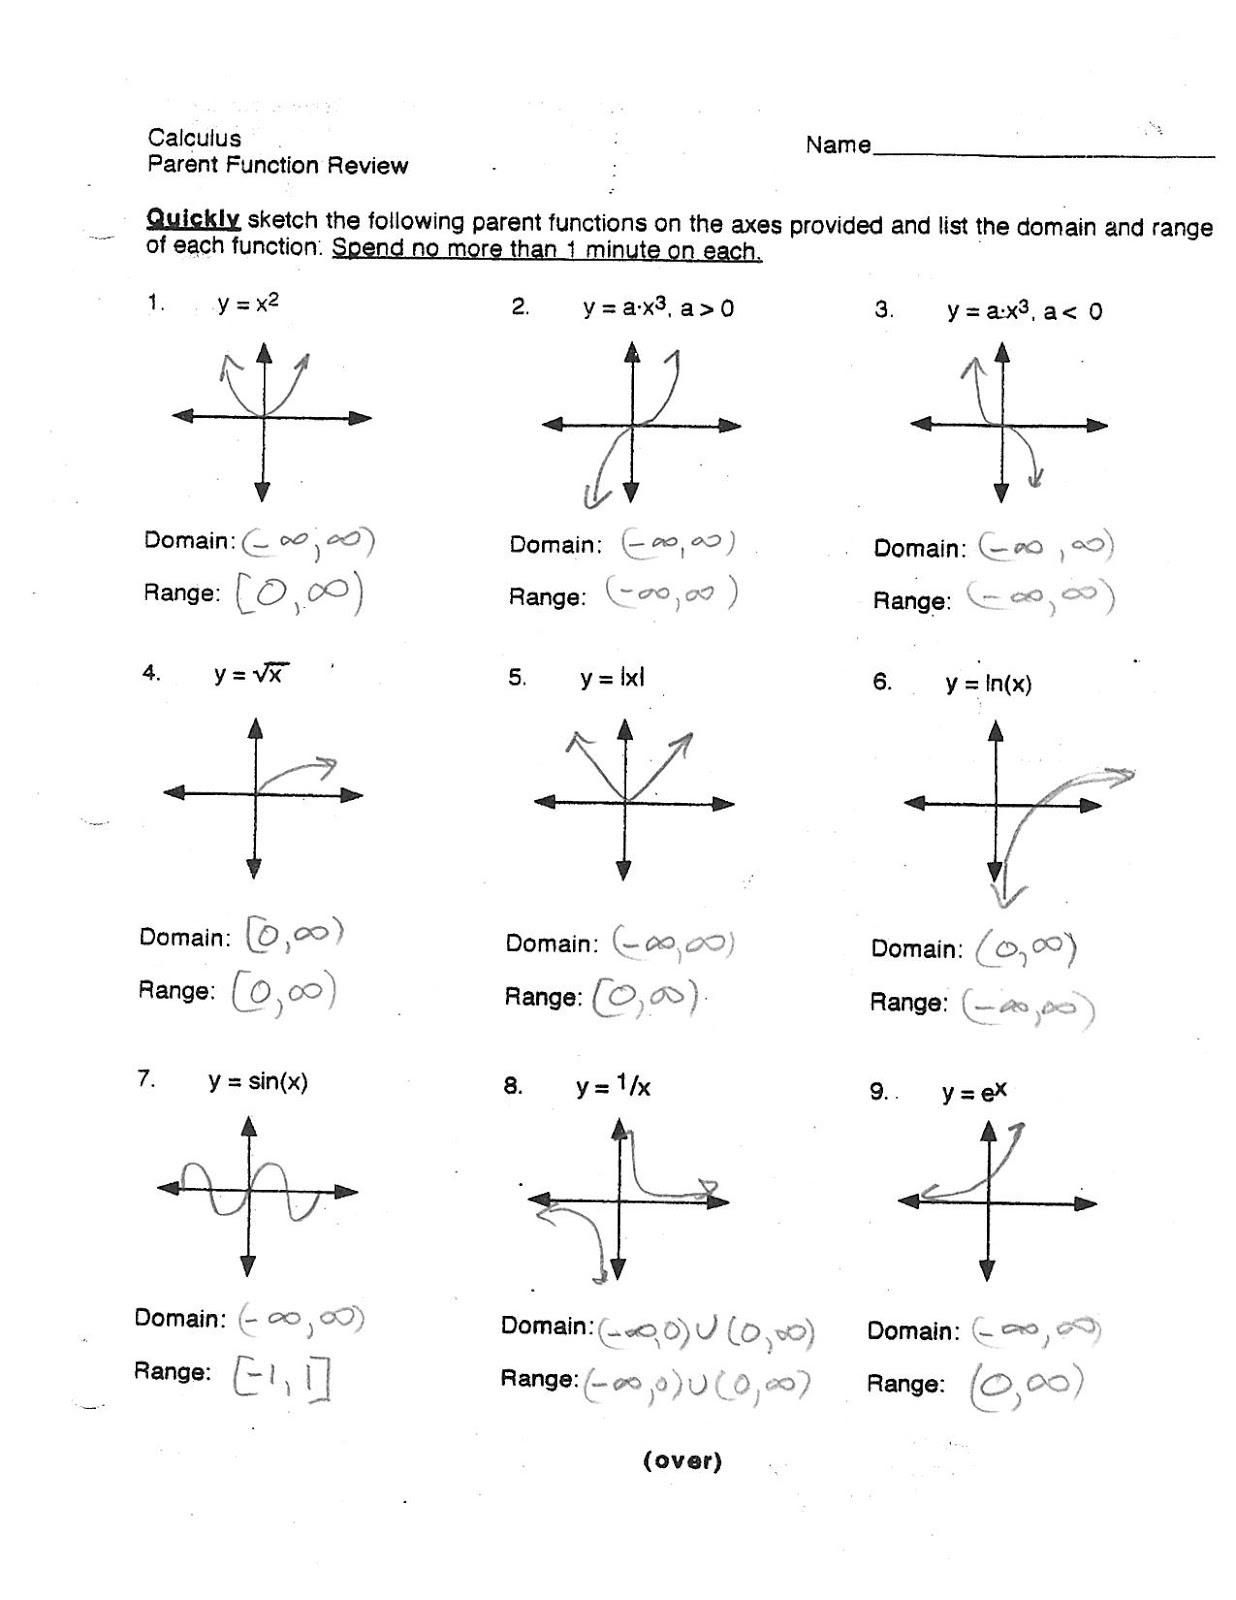 unit-circle-worksheet-with-answers